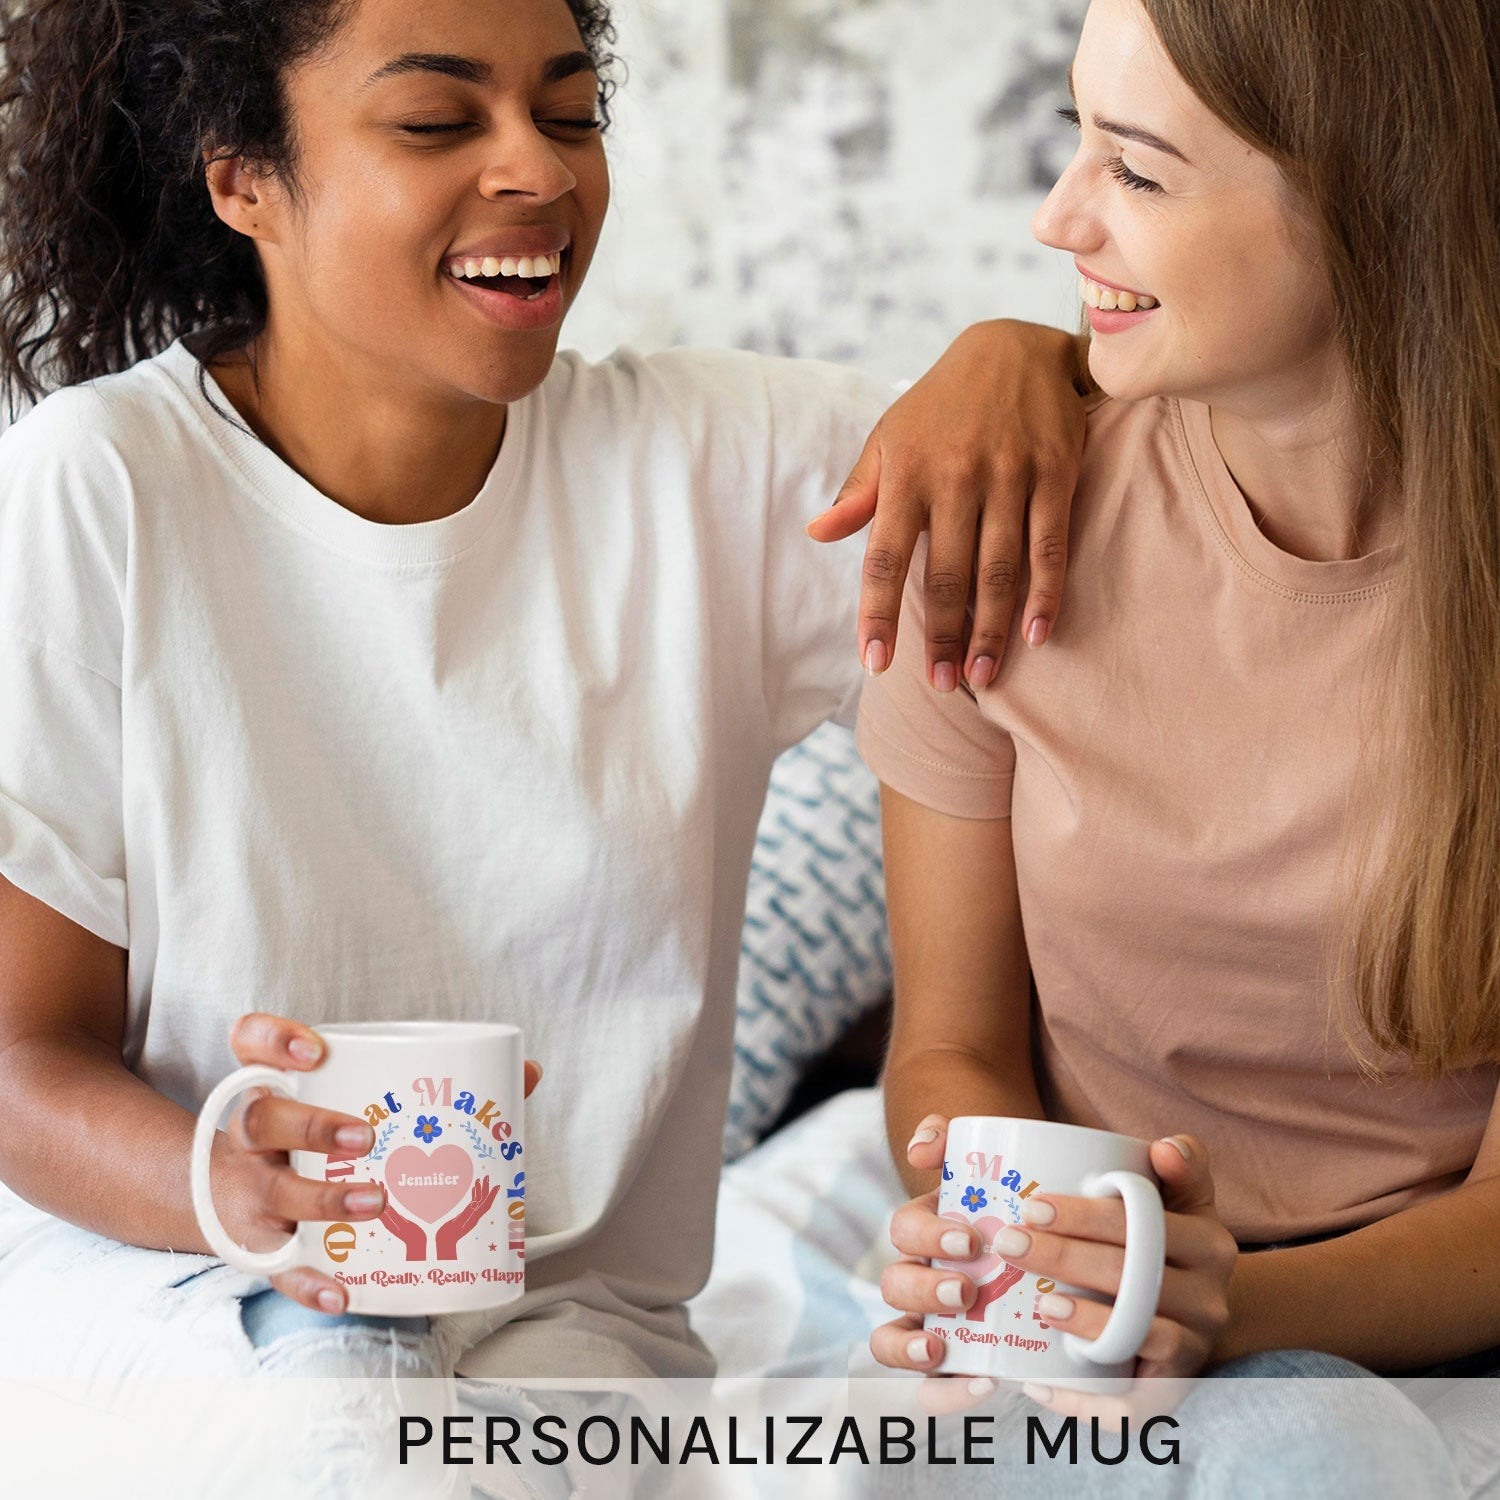 Do What Makes Your Soul Happy - Personalized  gift For Friends - Custom Mug - MyMindfulGifts